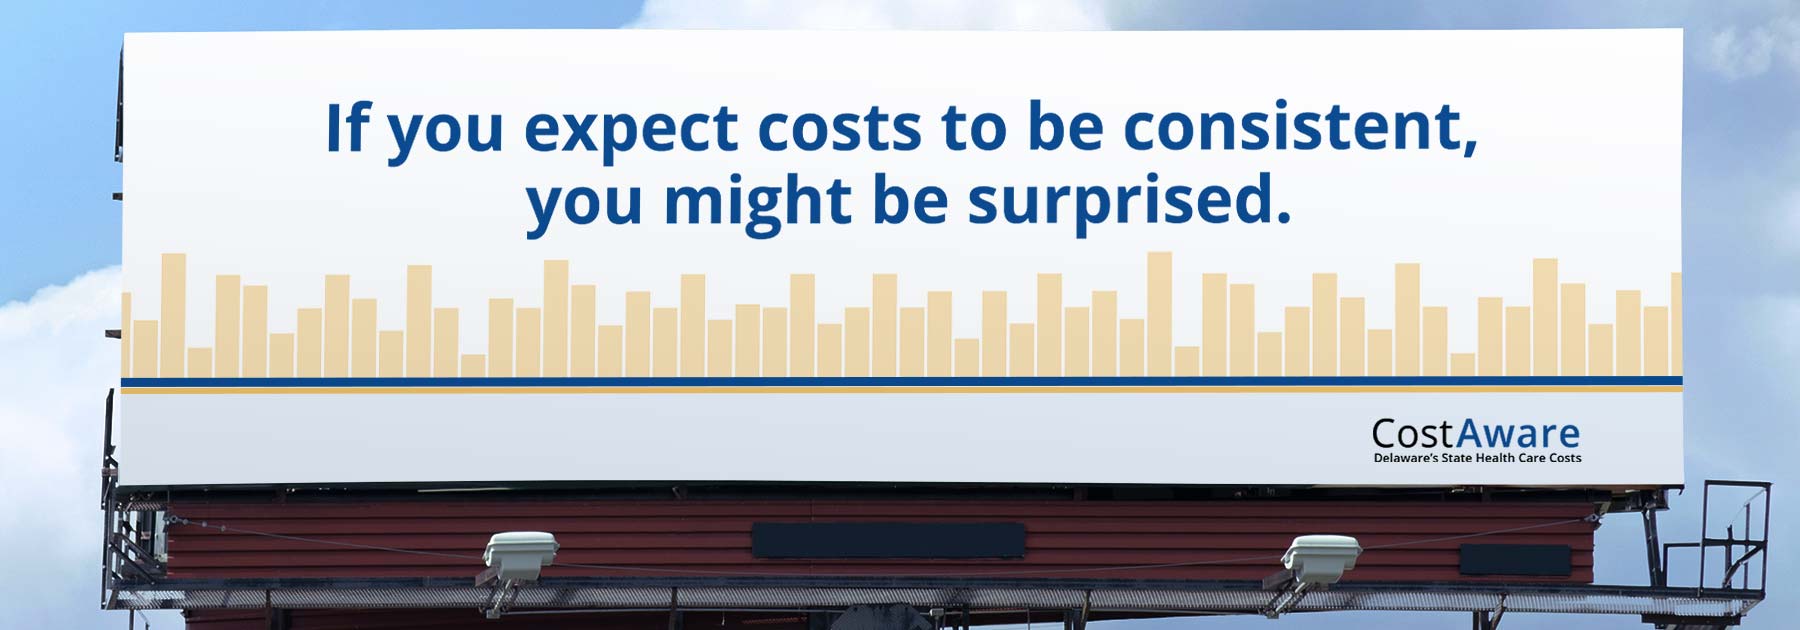 Billboard: If you expect costs to be consistent you might be surprised.